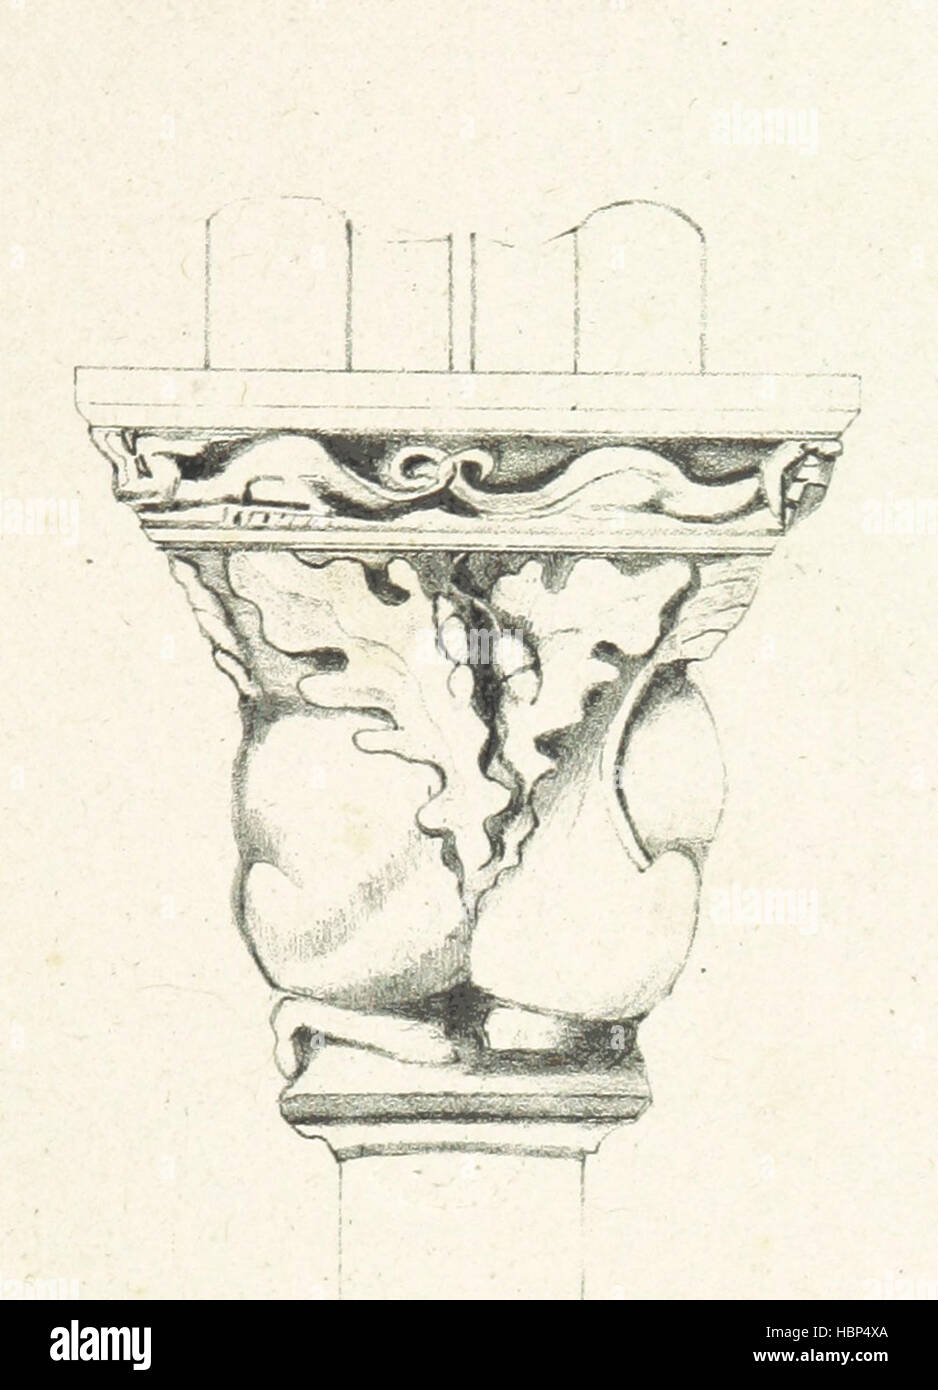 Image taken from page 15 of 'Mems of a Tour in Italy, from sketches by T. G. F[onnereau]. Esqre. inspired by his friend and fellow traveller C. [Stanfield] Esqre. R.A. [Lithographic views without letterpress.]' Image taken from page 15 of 'Mems of a Tour Stock Photo